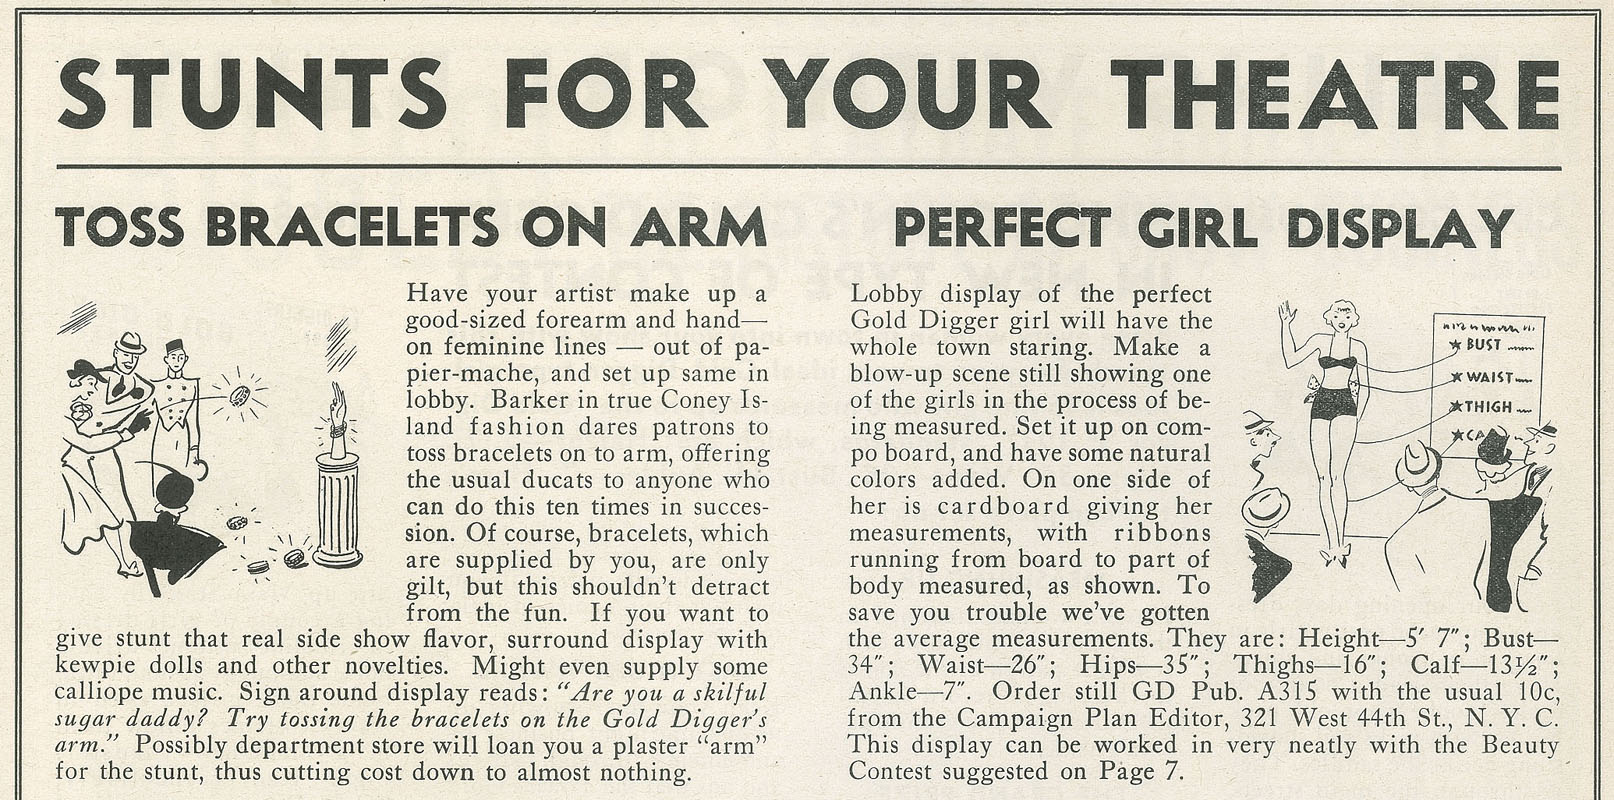 Excerpt from Page 7 of Gold Diggers of 1937 press book.